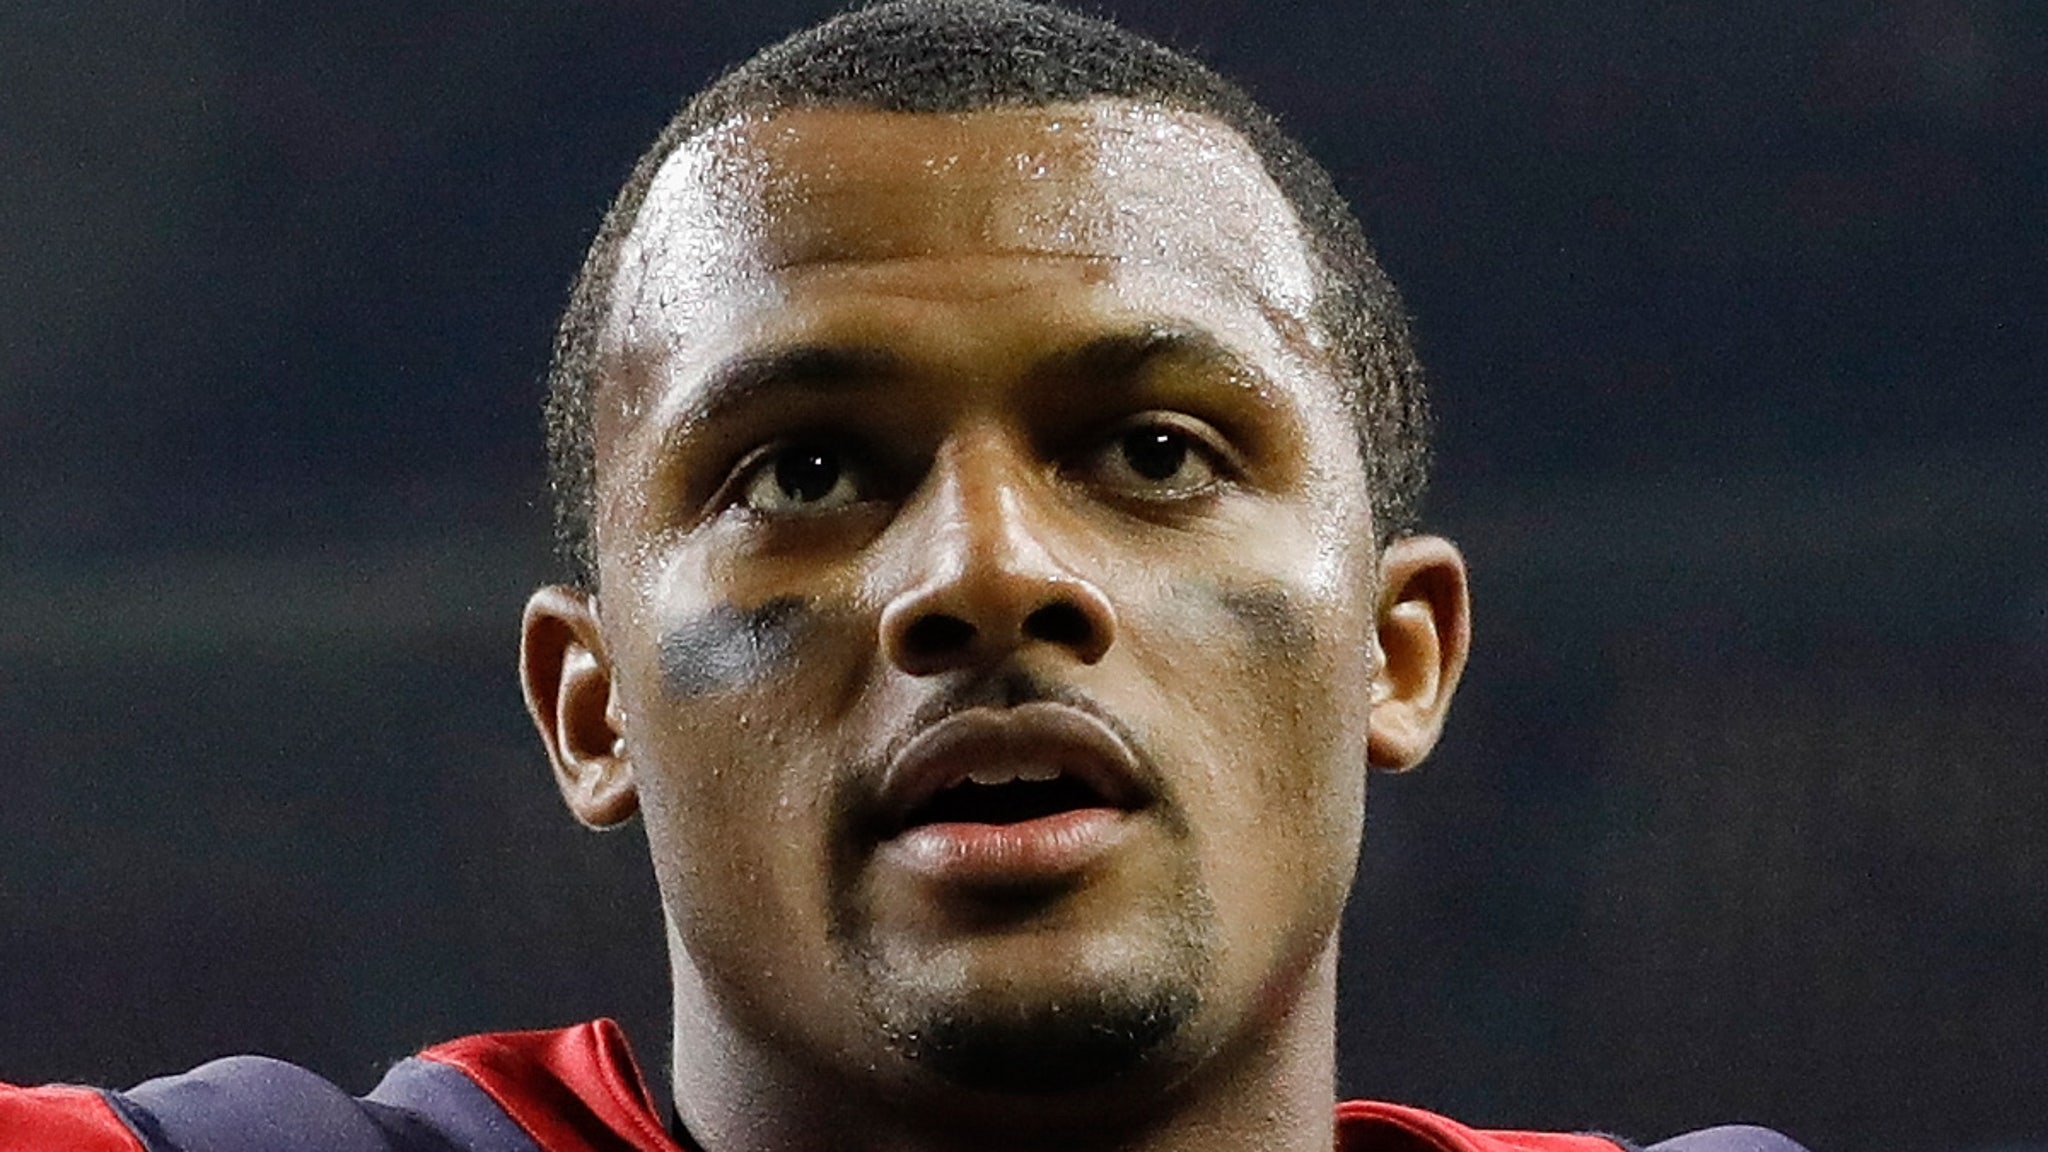 Deshaun Watson alleges that several prosecutors gave massages to QB after alleged incidents